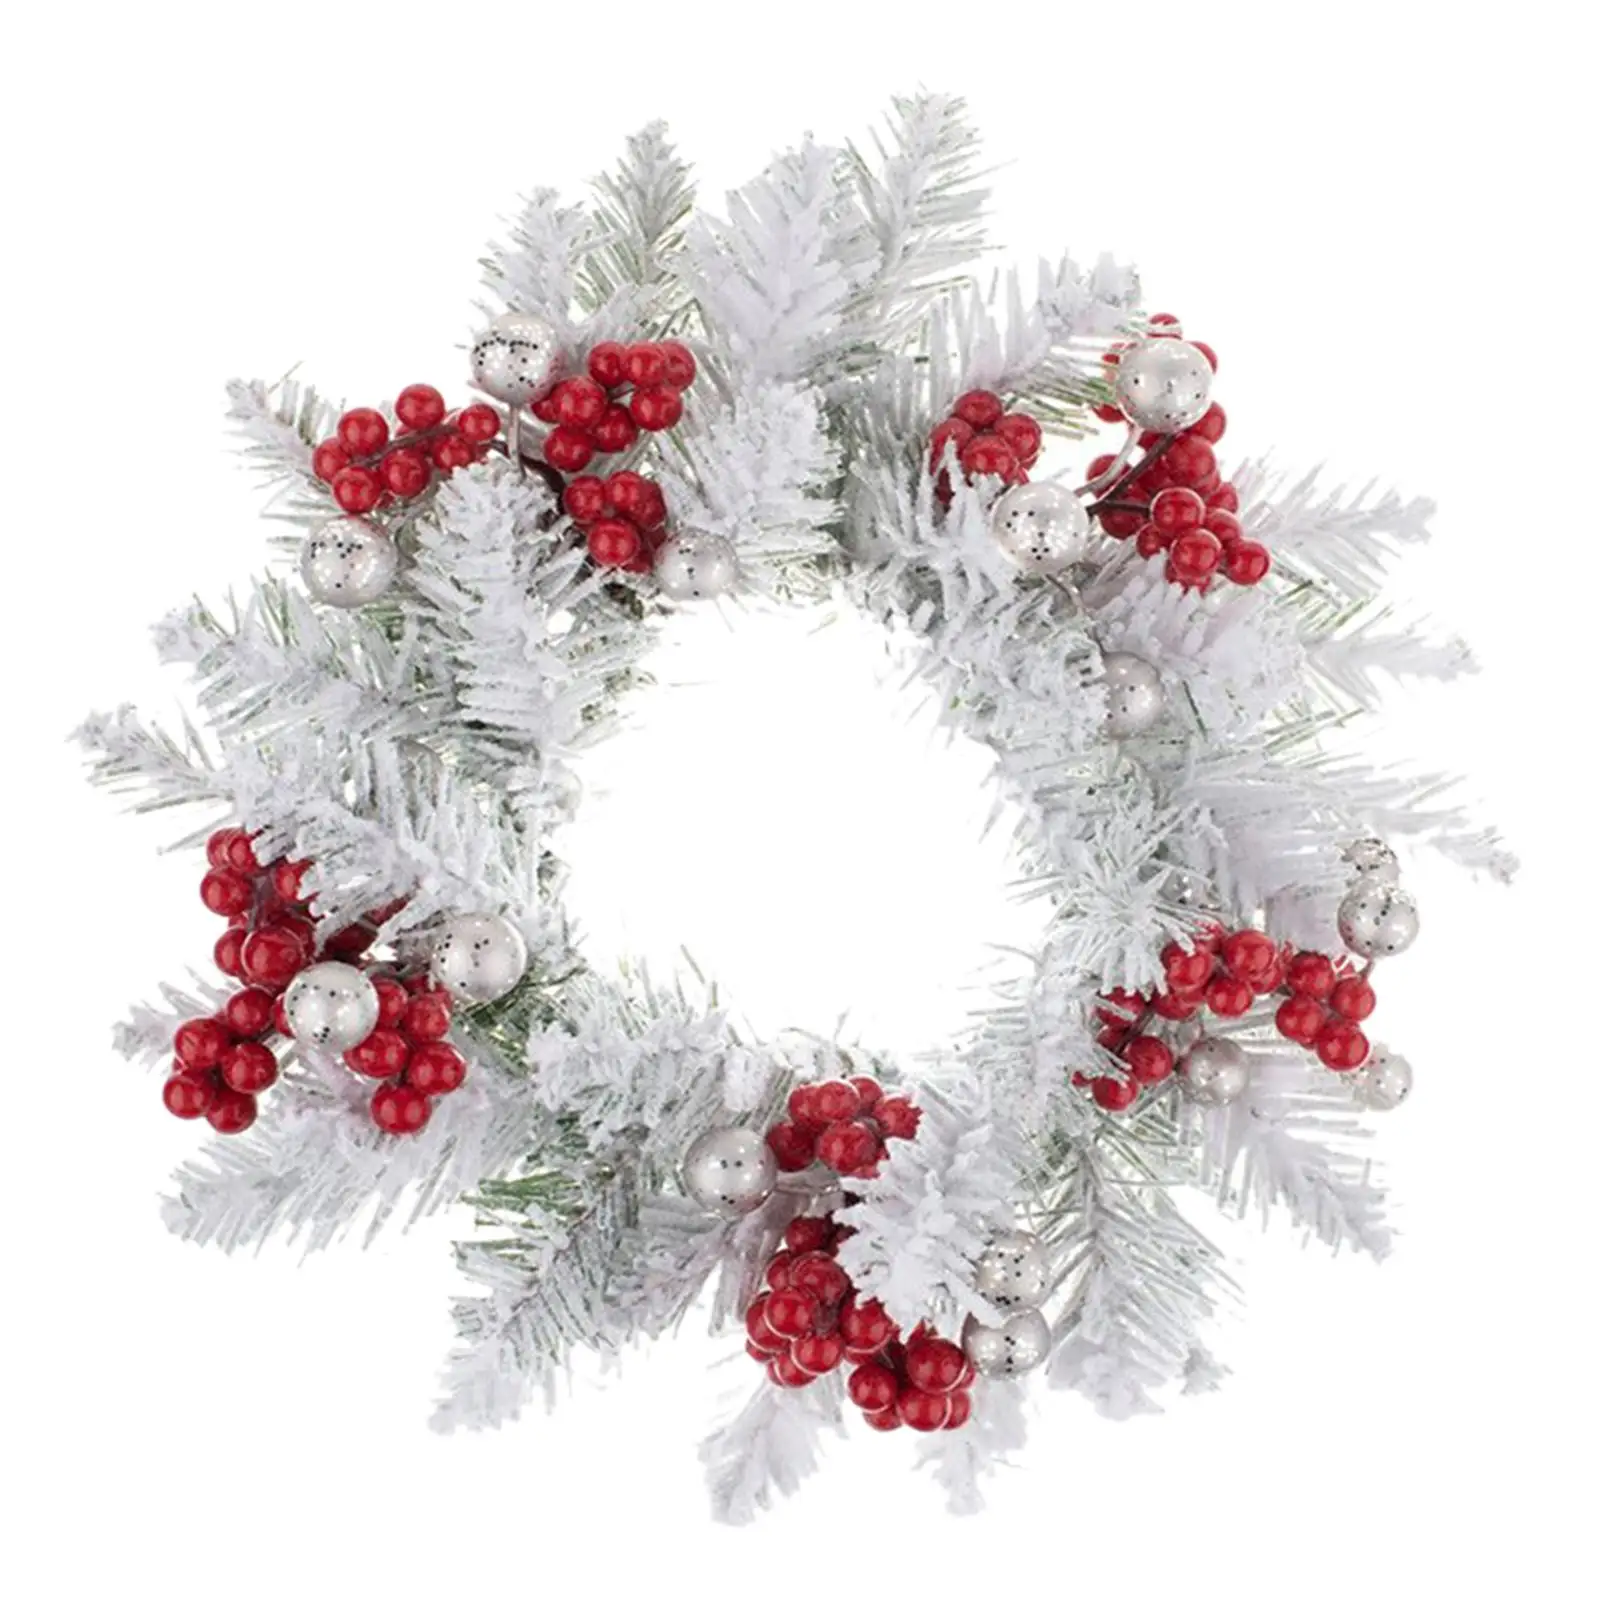 Christmas Candle Wreath Decorative Candles Holder Creative Wreath Garland for Xmas Dining Room Dinner Thanksgiving Wedding